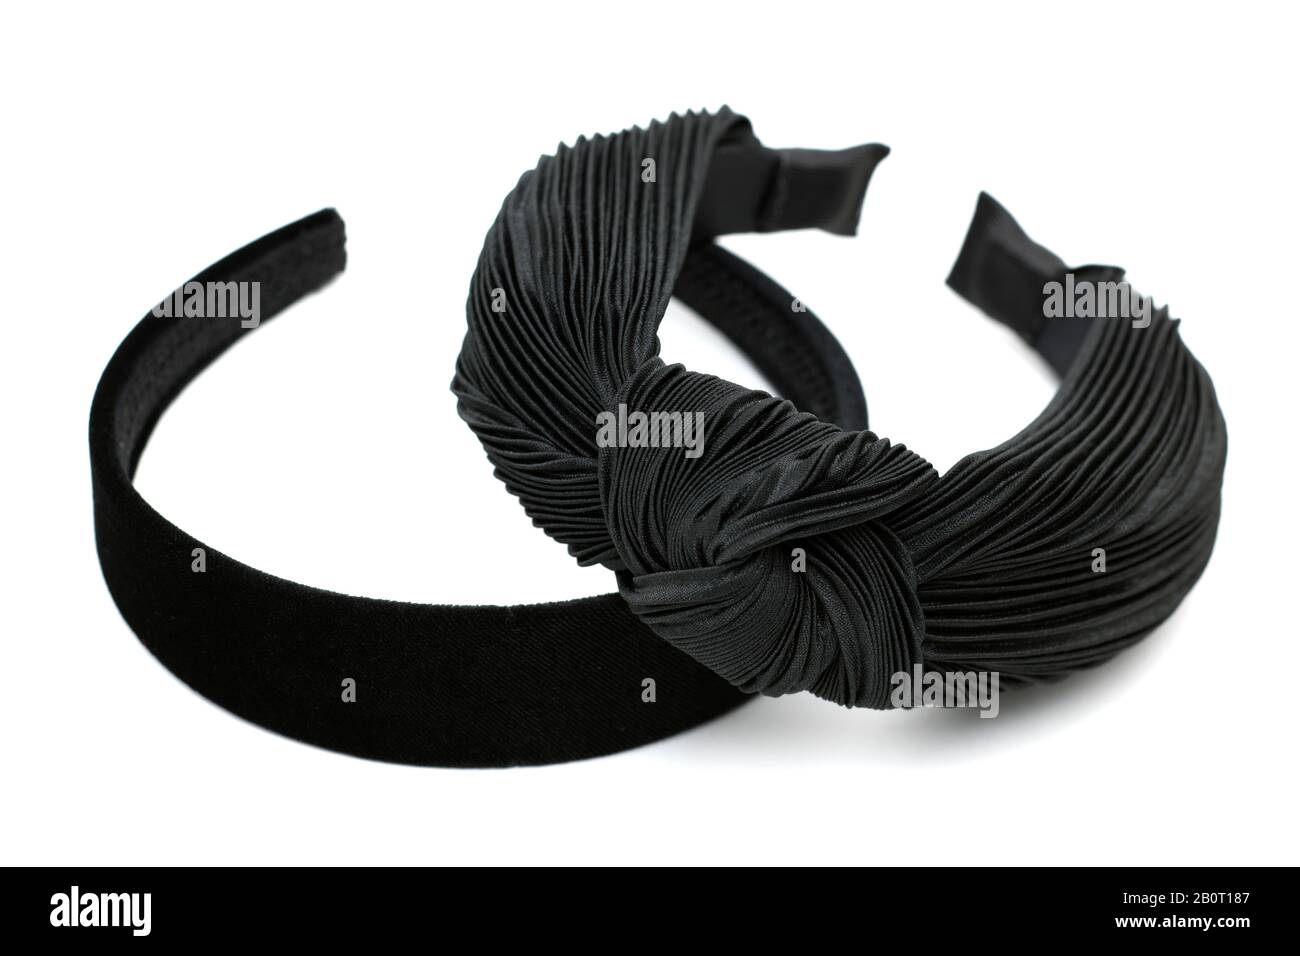 Hair Bands for Hair Control Stock Photo